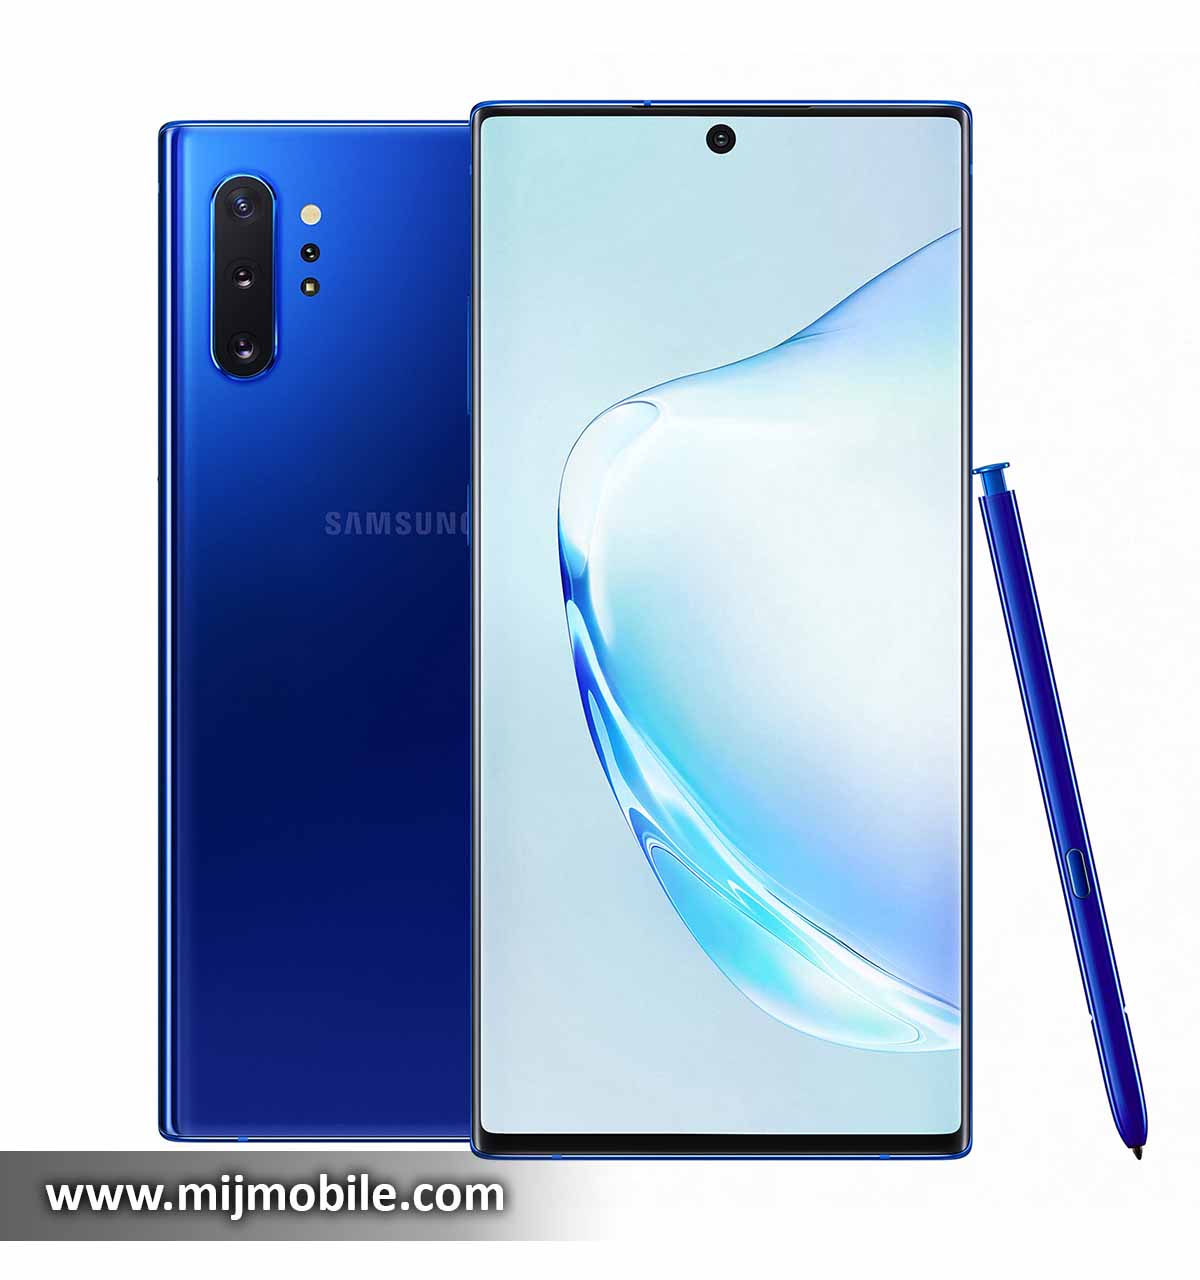 Samsung Galaxy Note 10 Plus Price in Pakistan & Specifications Samsung Galaxy Note 10 Plus Price in Pakistan is 189,999.